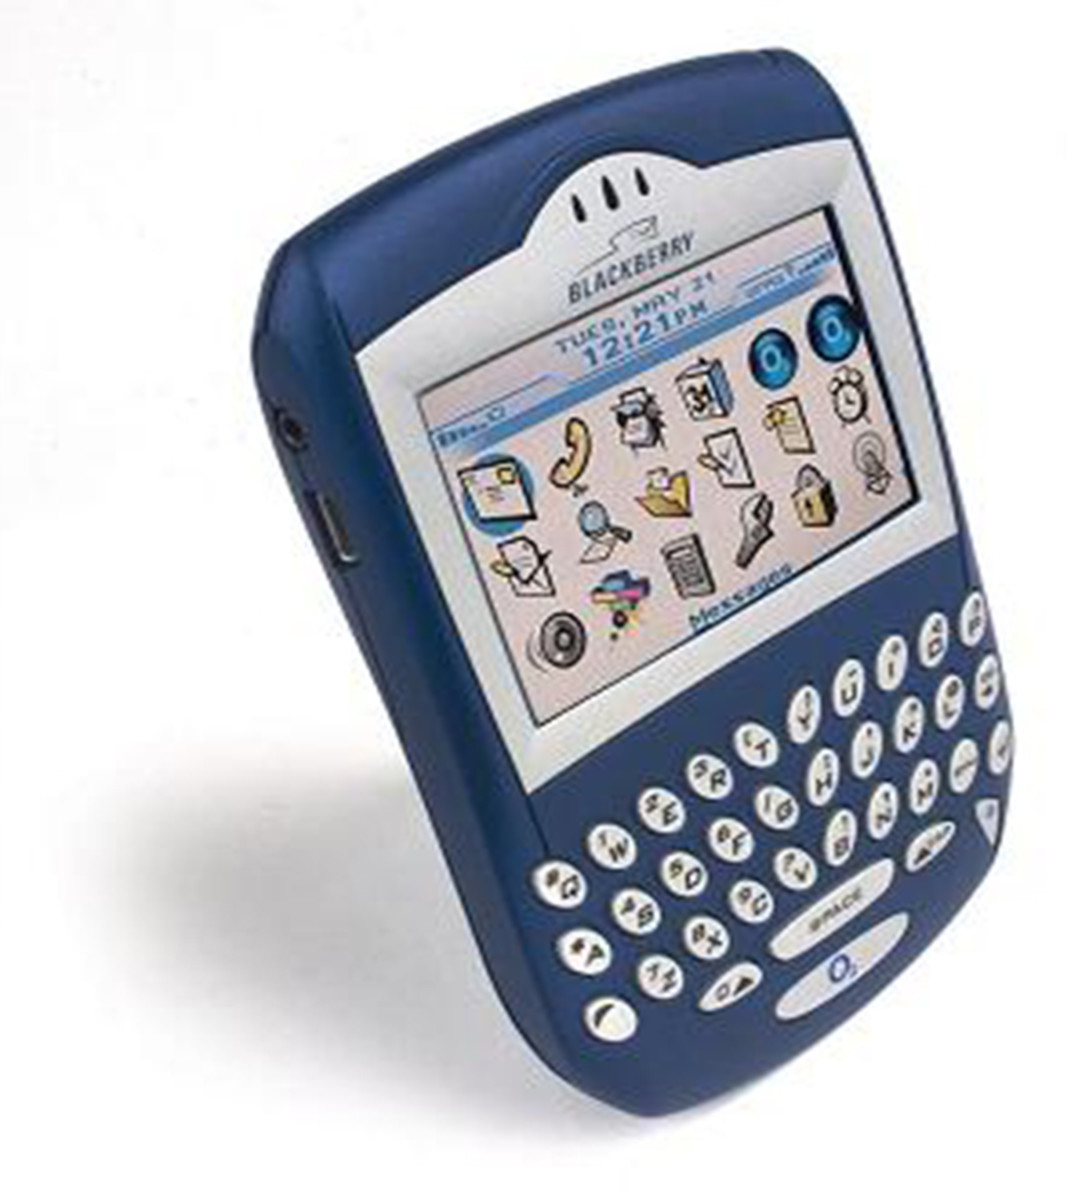 One of the newest of the emerging technologies, the Blackberry which replaced the older gadget like the land line, message machine with text messaging and other features that have taken control of our lives.